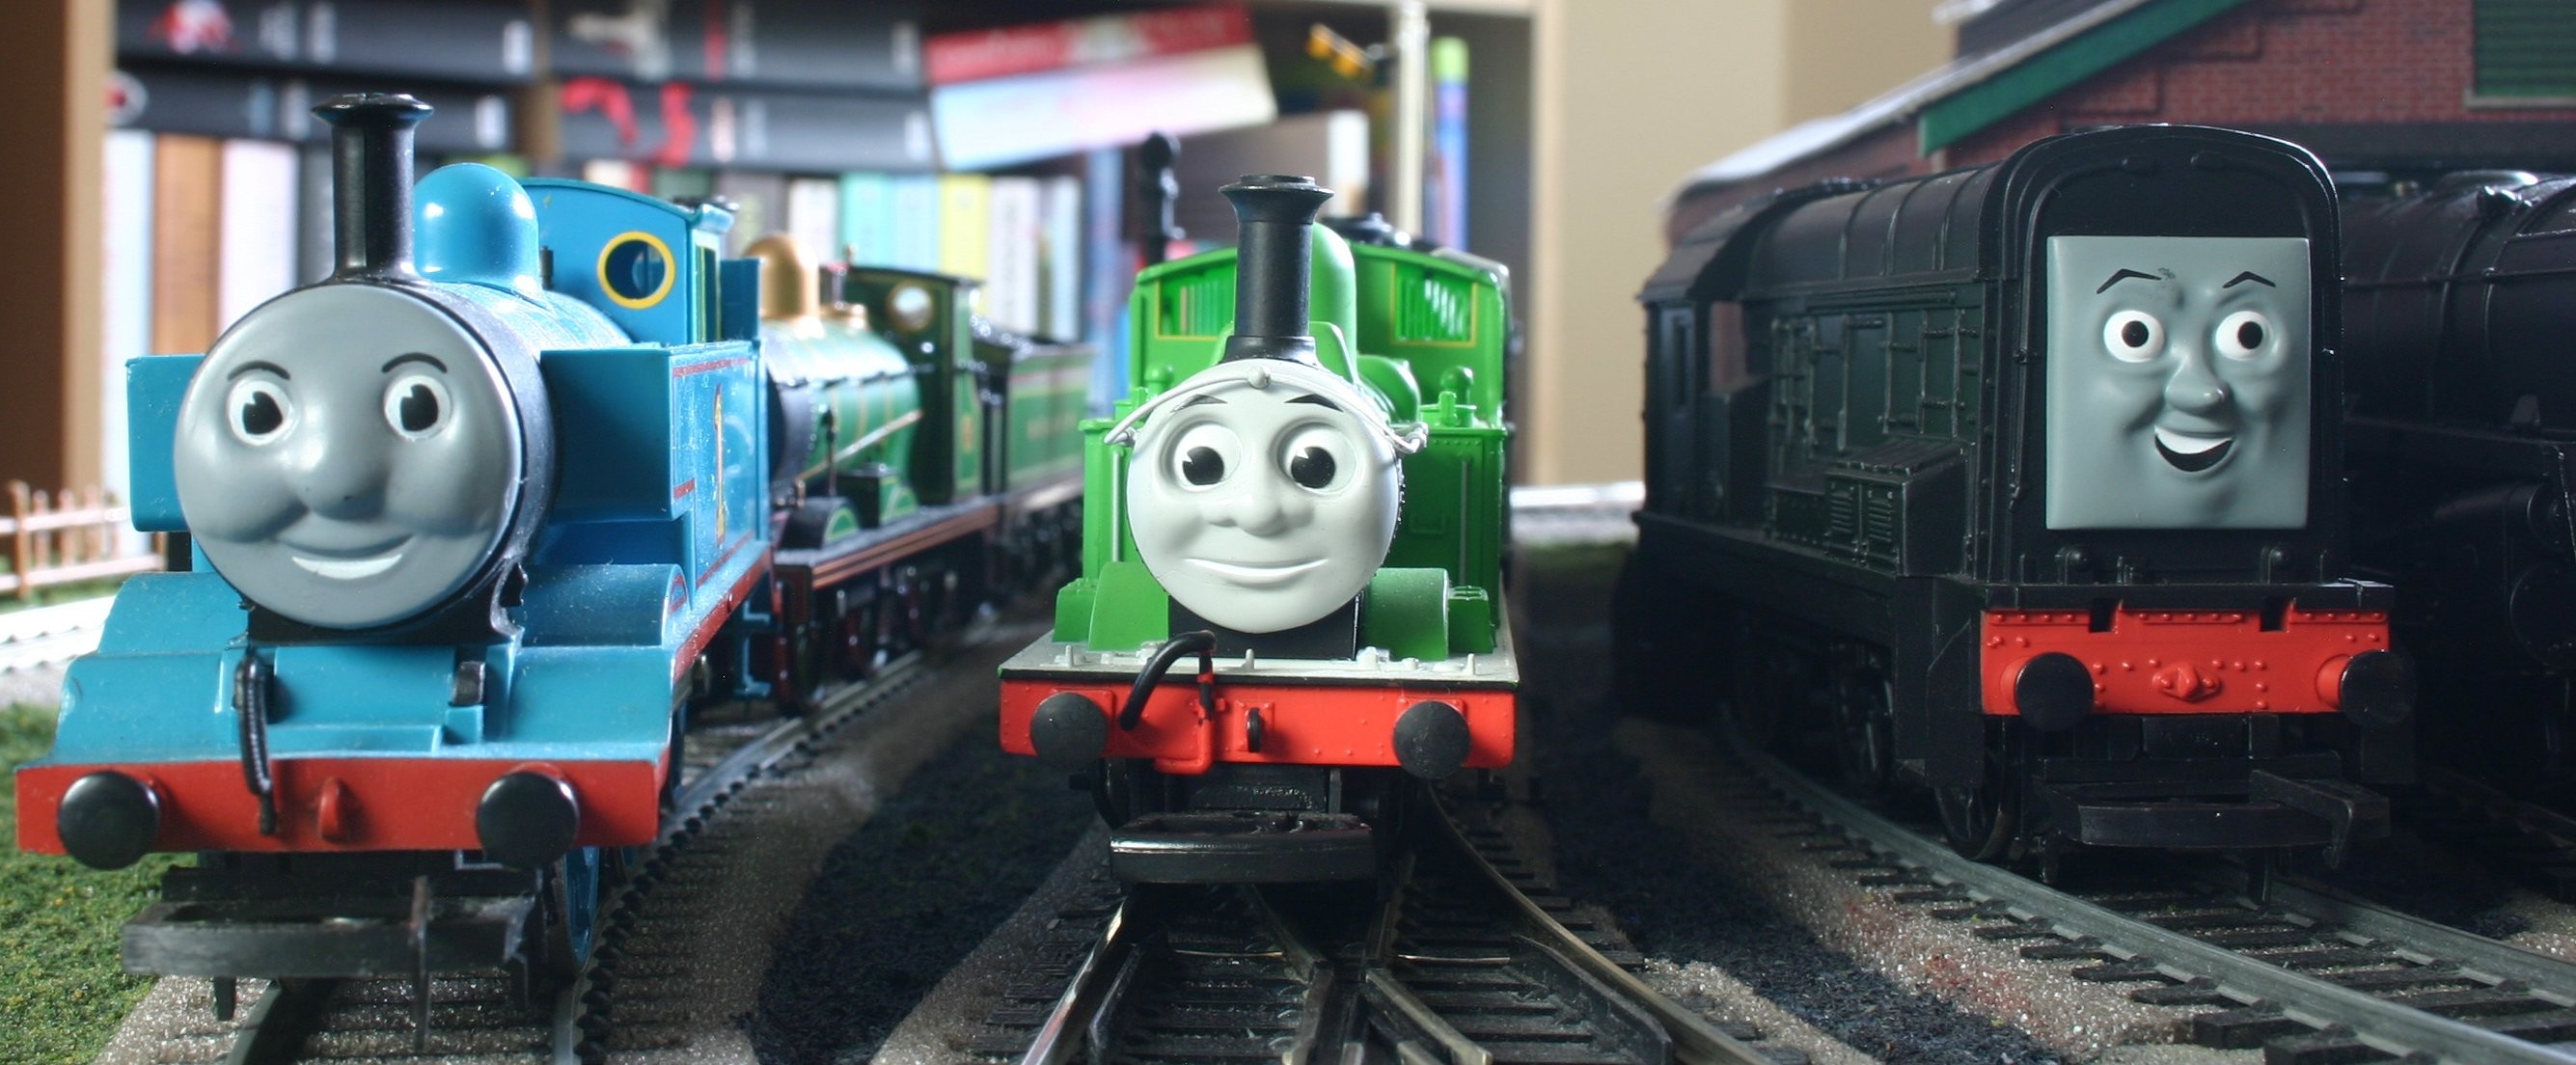 2670x1104 Thomas The Tank Engine & Friends Pics, TV Show Collection